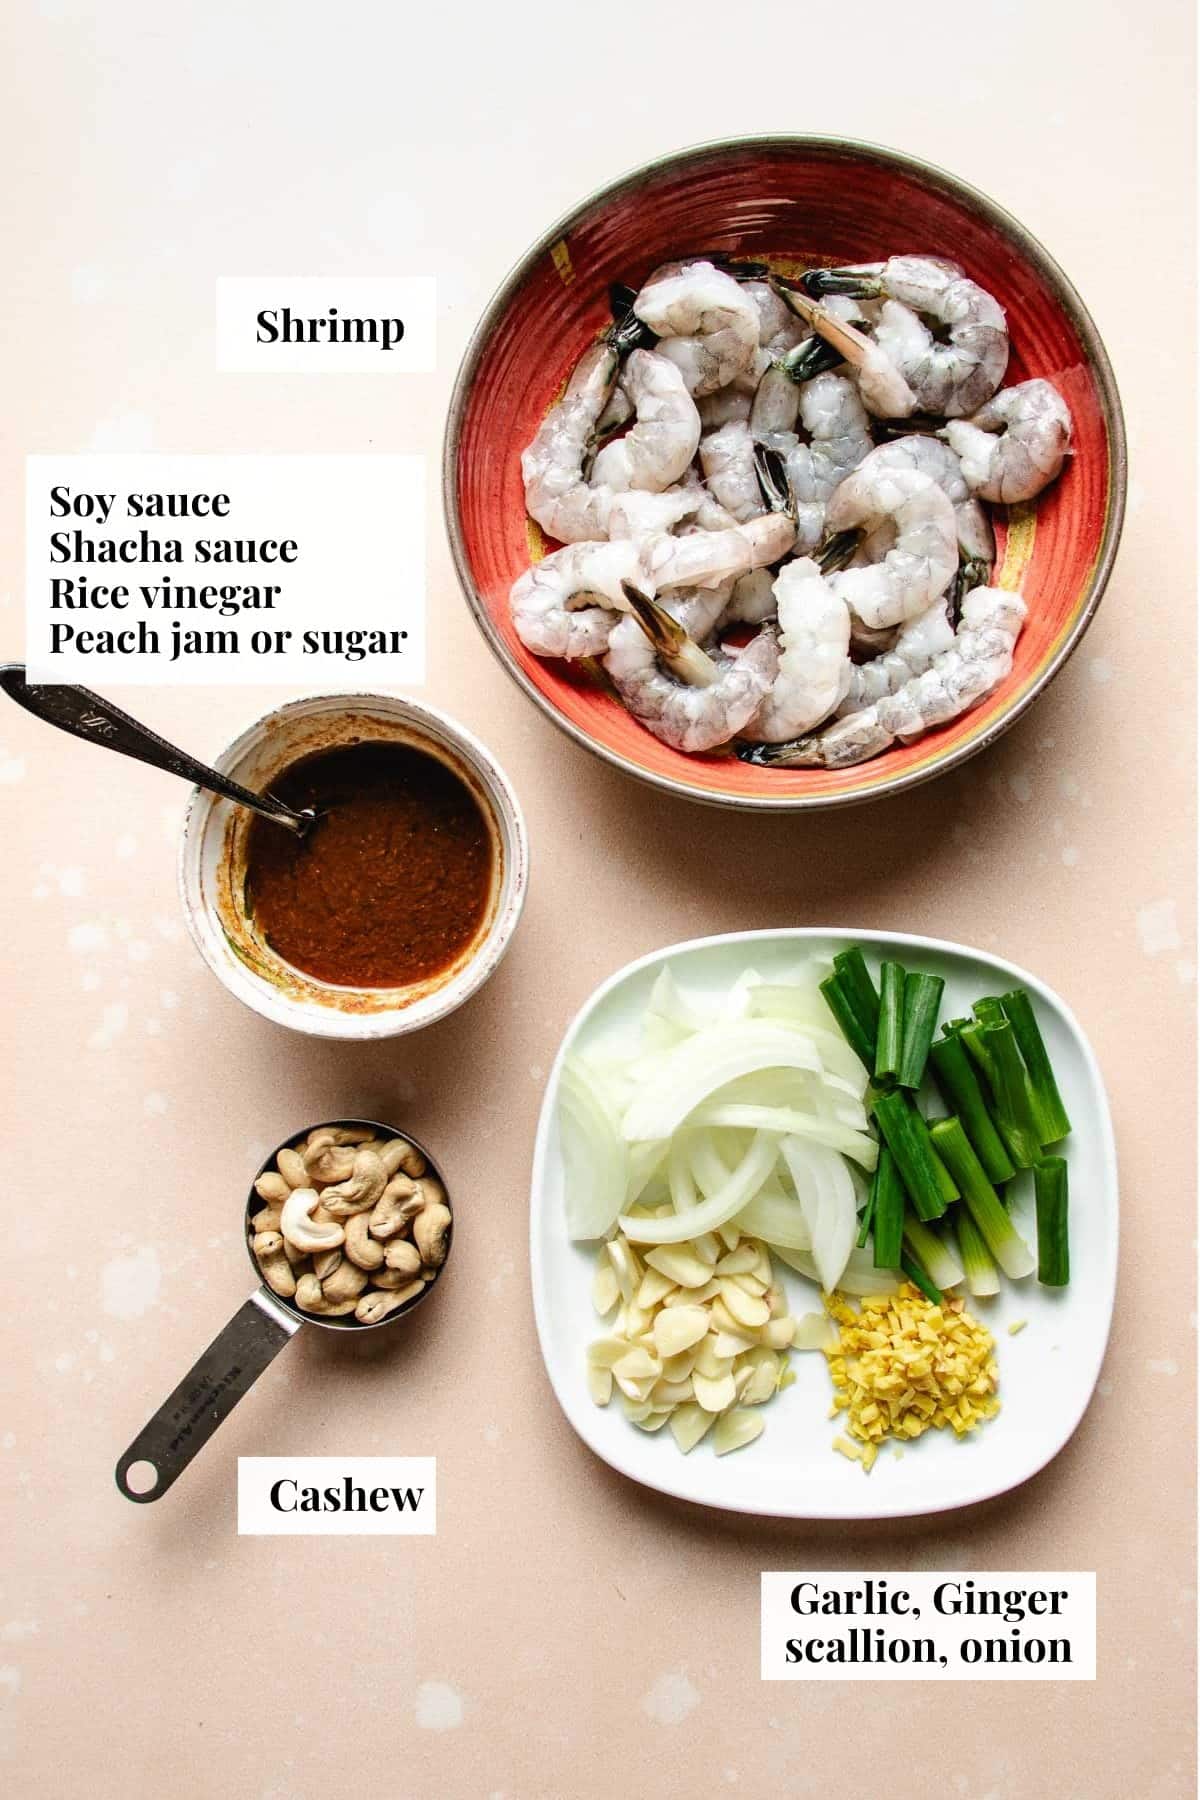 Photo shows ingredients and sauce prepared before cooking.